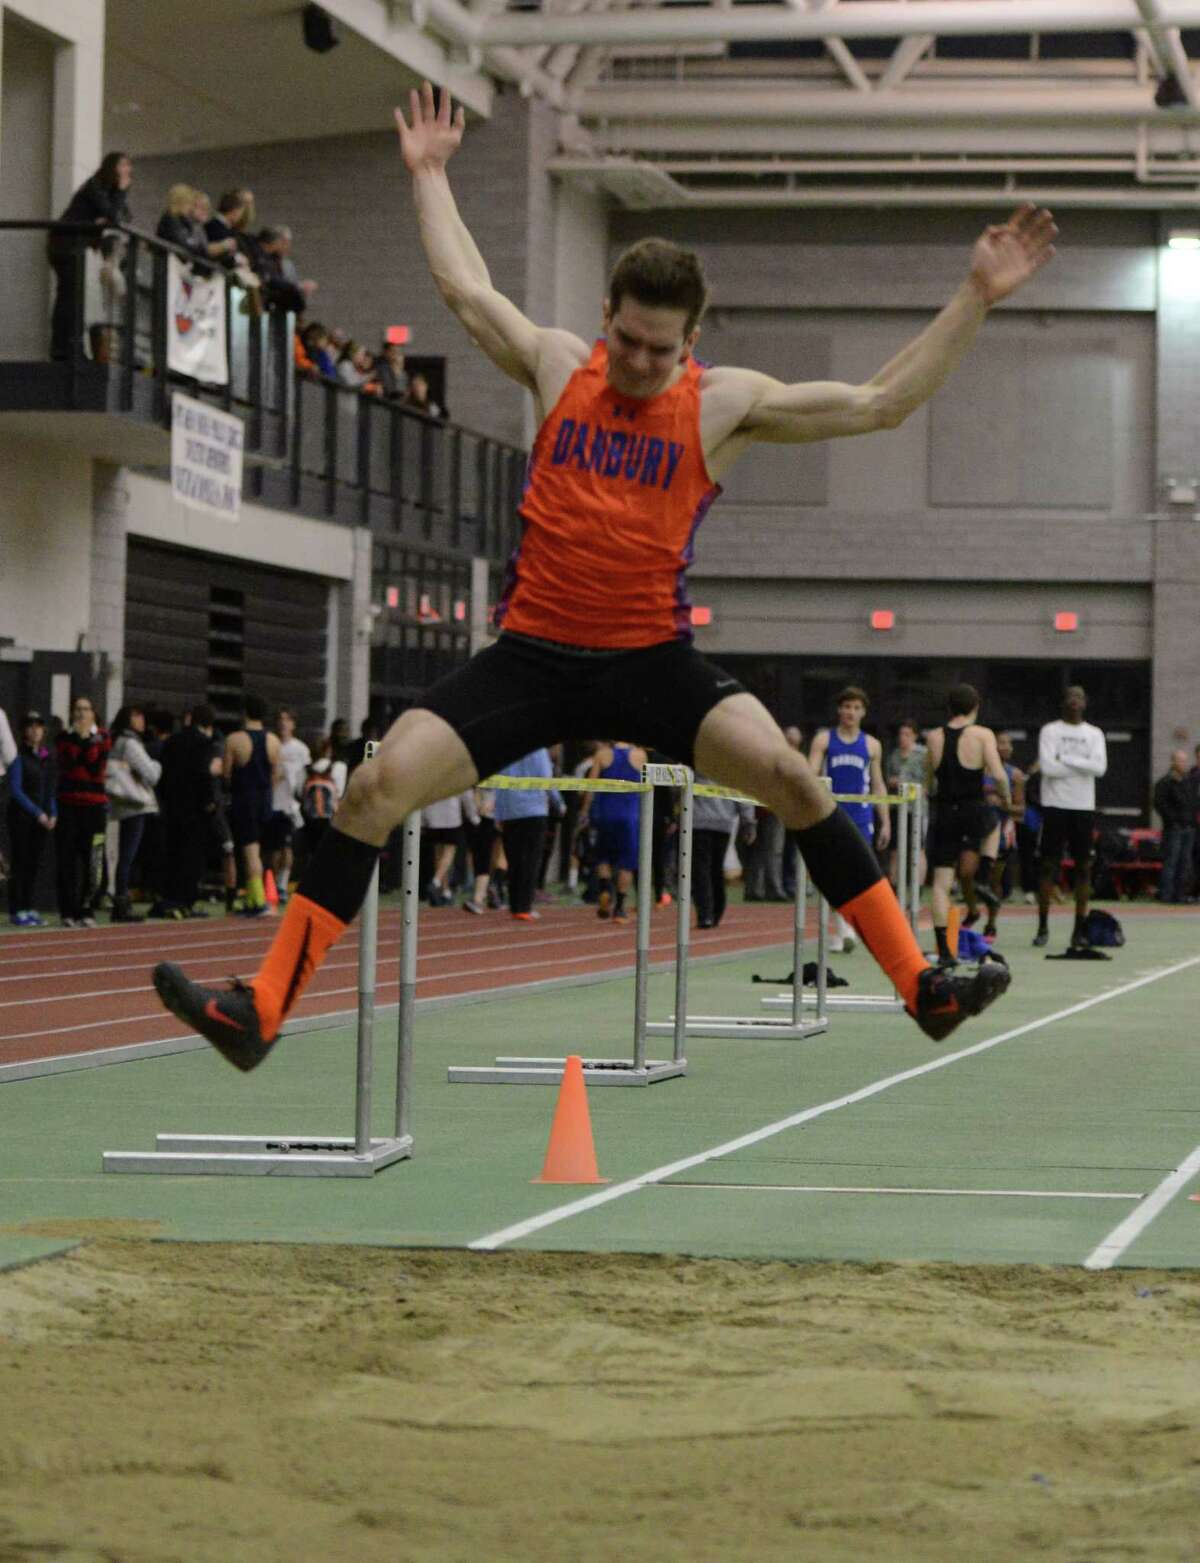 Danbury's Mike Morrow competes in the long jump event Thursday, Feb. 5, 2015, during the FCIAC boys and girls indoor track and field championhsips at the Floyd Little Athletic Center in New Haven, Conn.